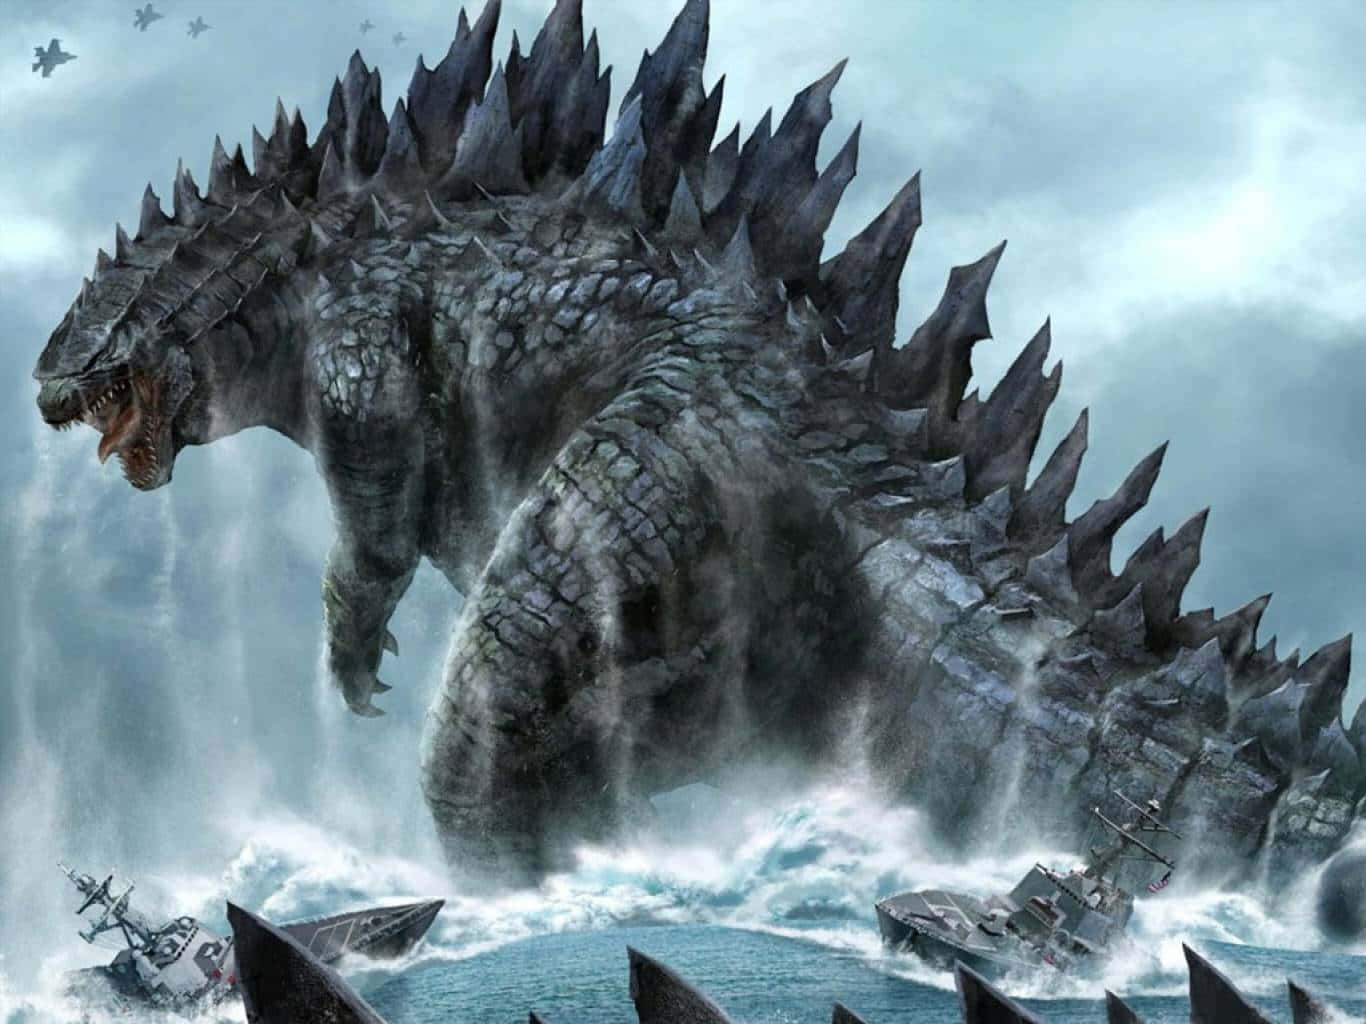 Stand in the Face of Destruction: The Godzilla Threat